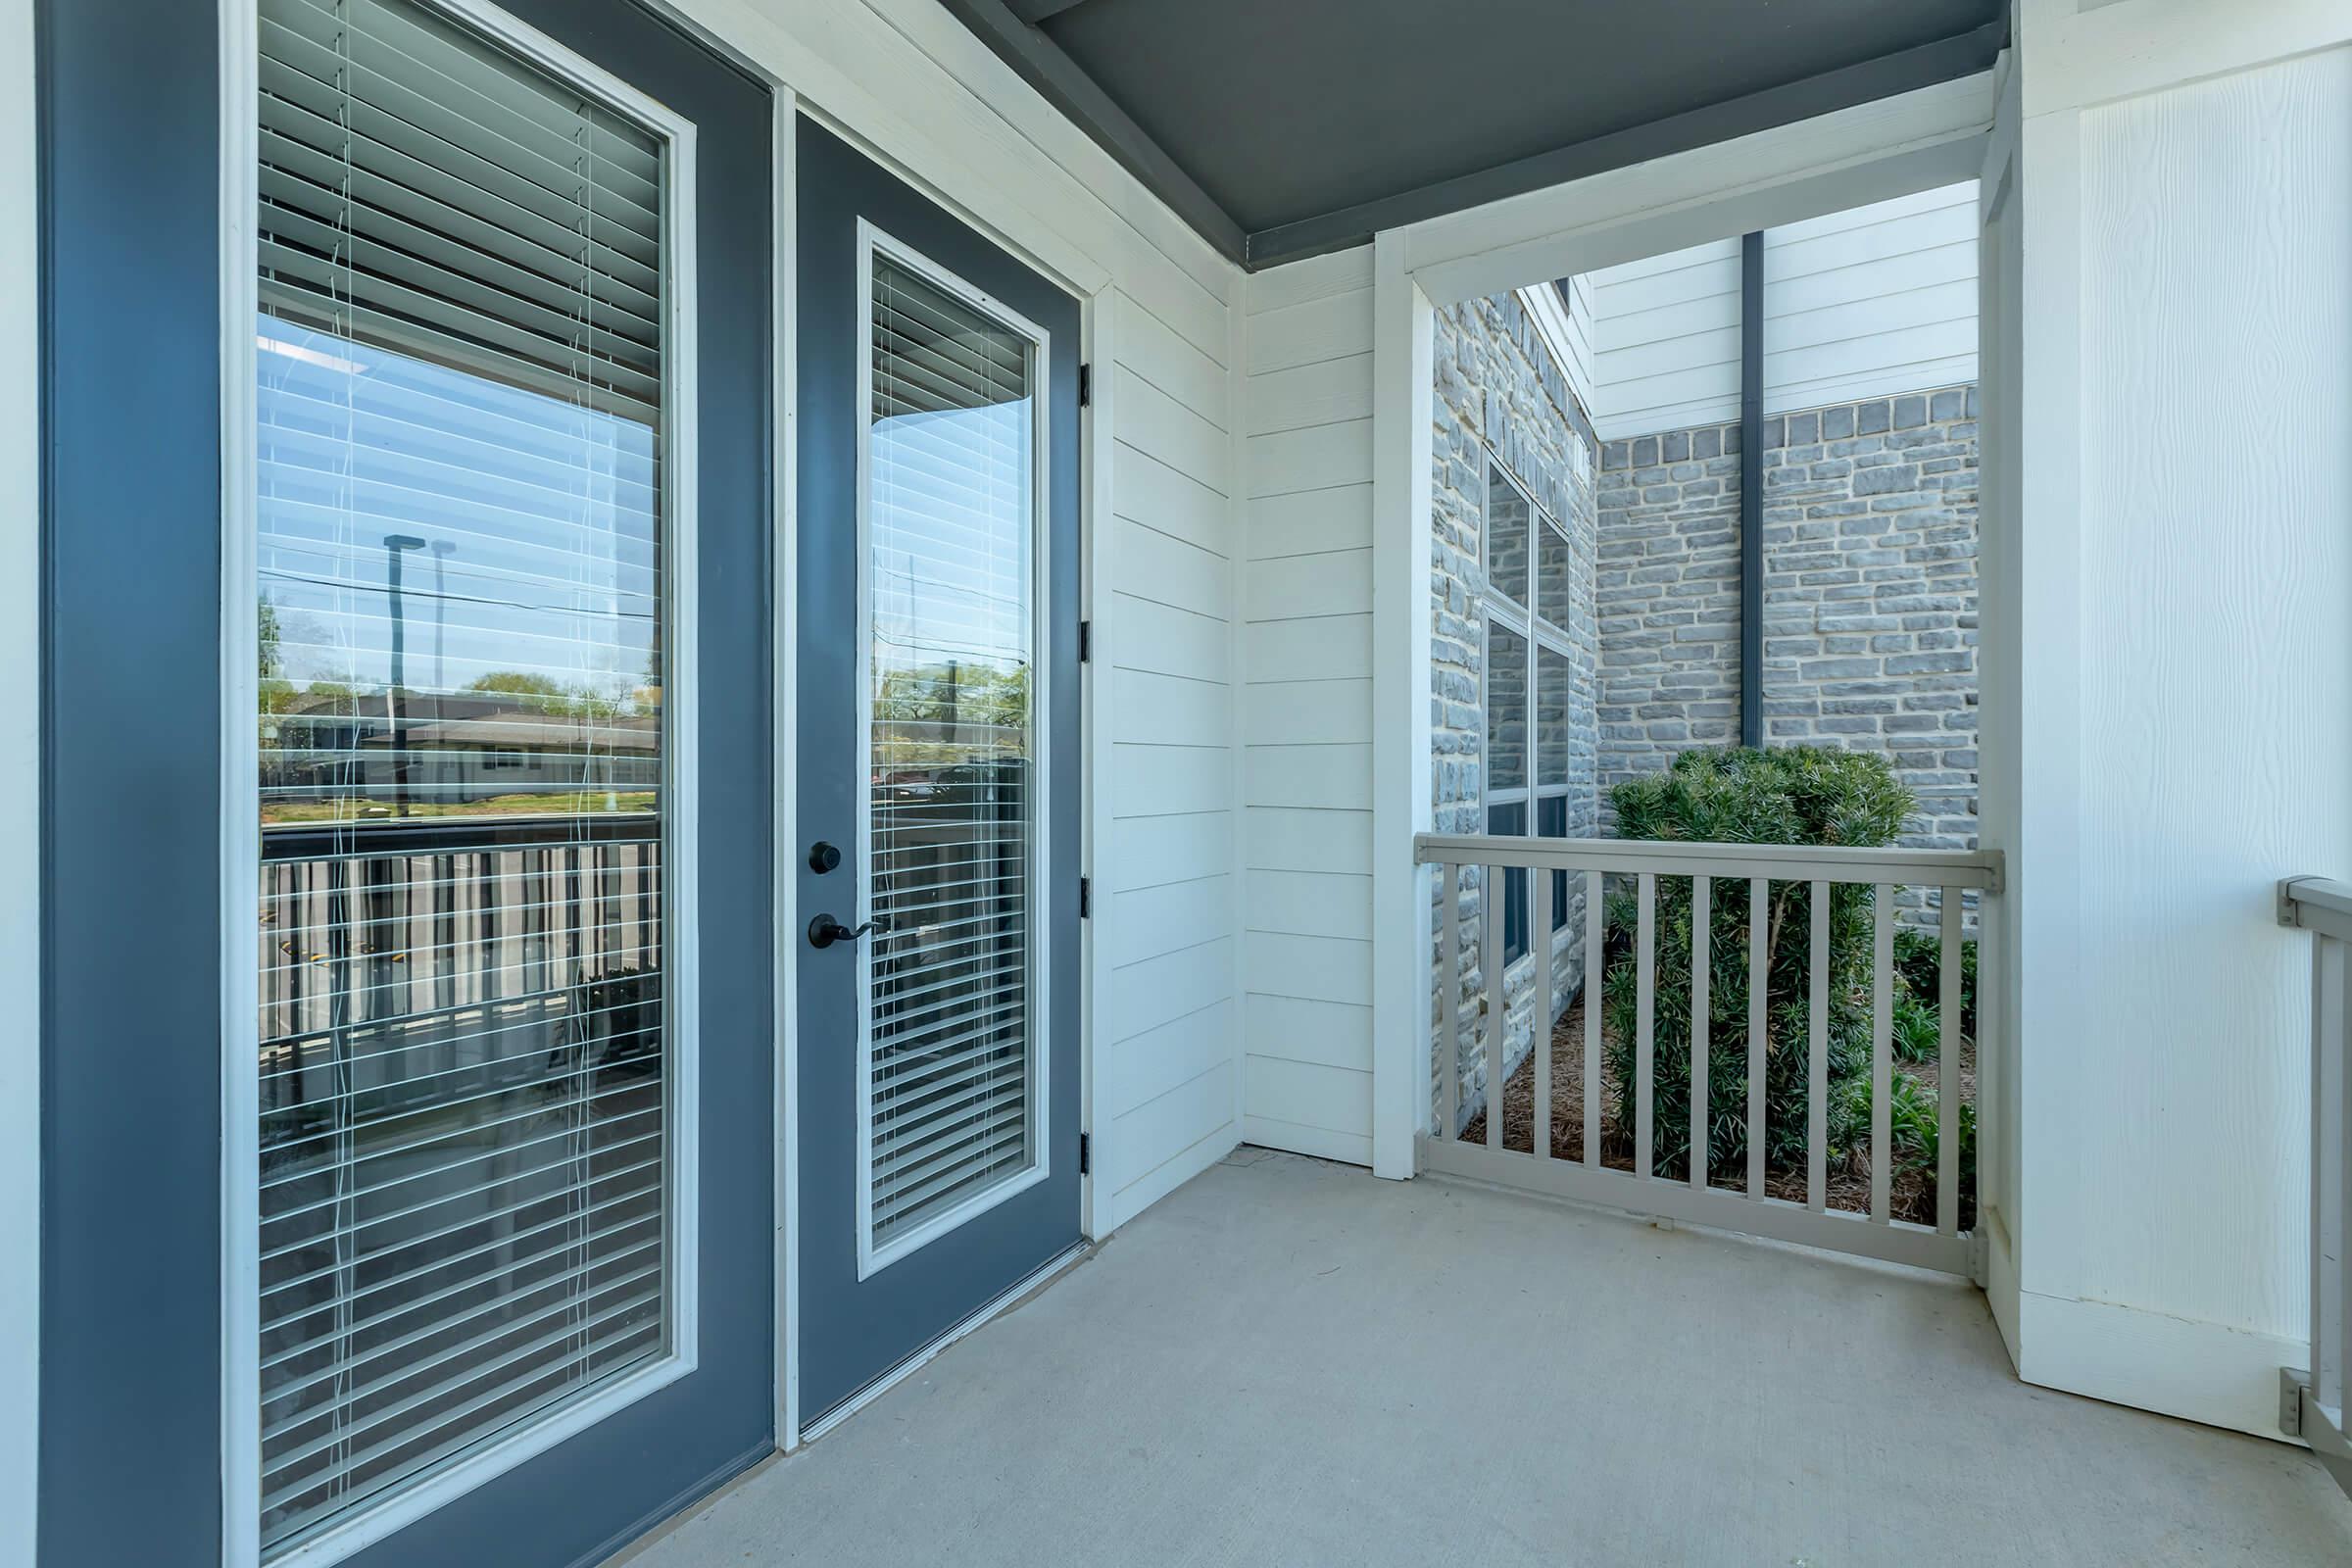 Balcony or patio views of Old Hickory, TN